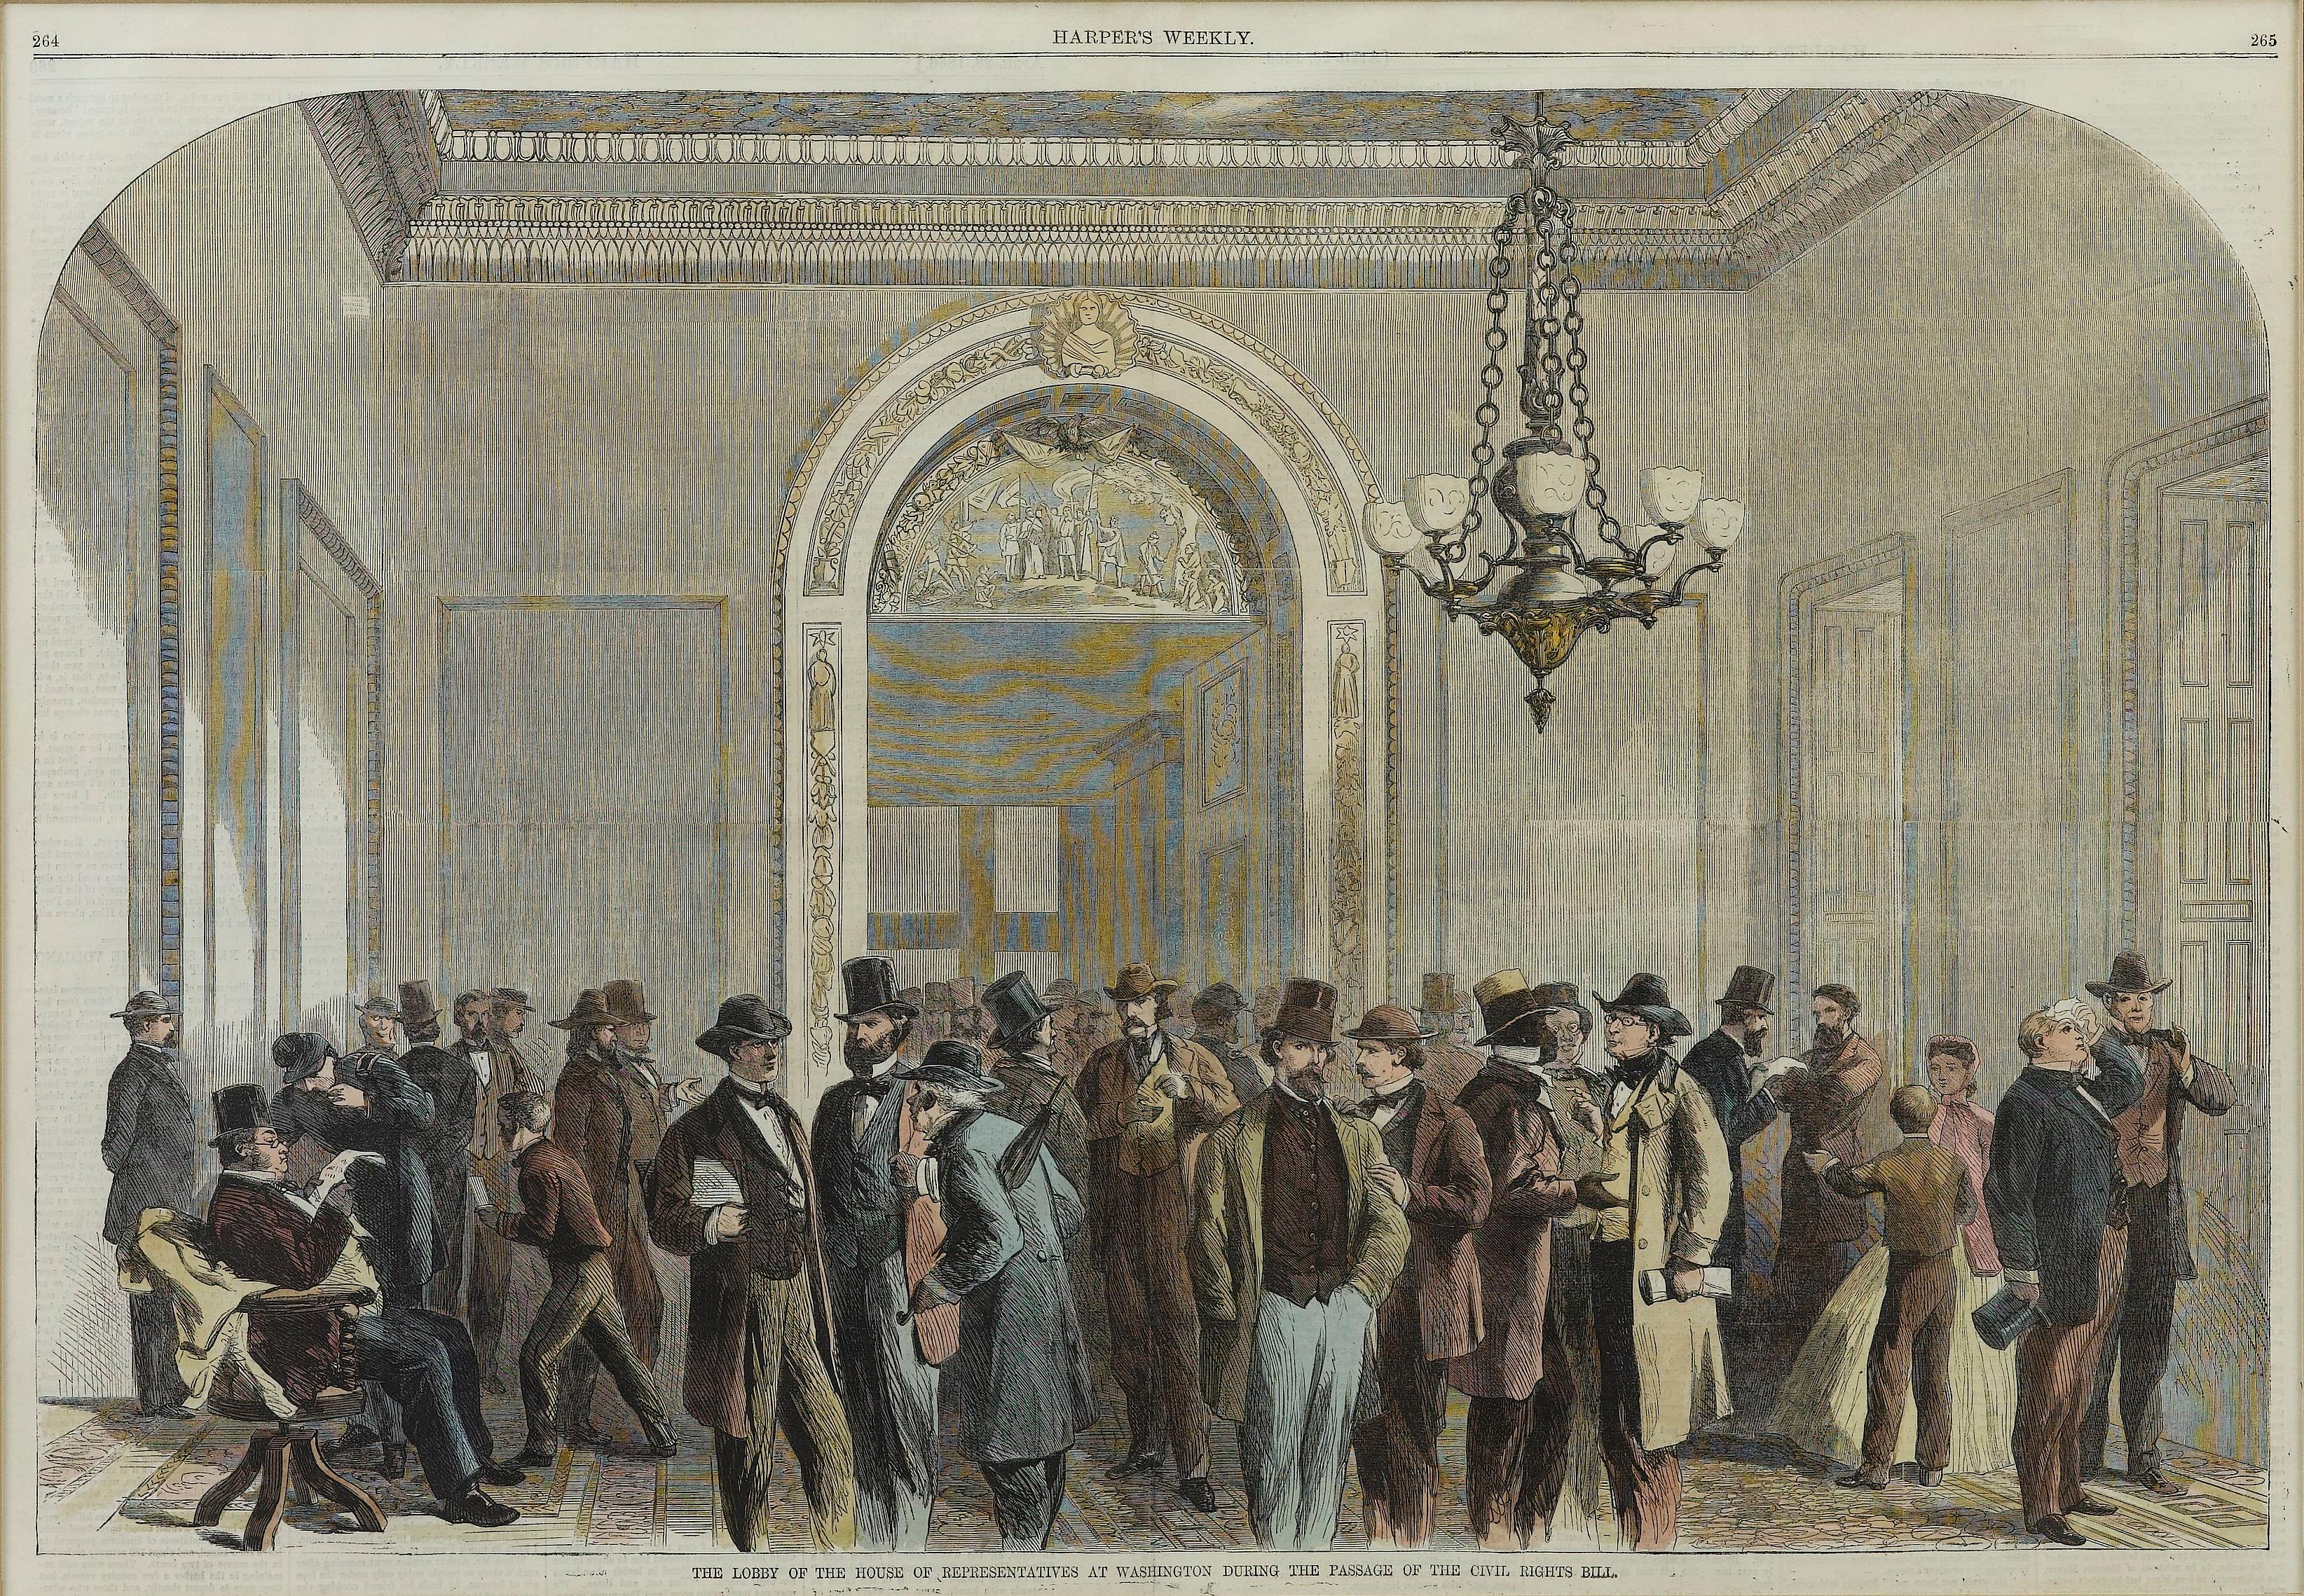 This original wood engraving is titled “The Lobby of the House of Representatives at Washington During the Passage of the Civil Rights Bill.” It was published as a double-page image, in the April 28, 1866 issue of the famous 19th century newspaper